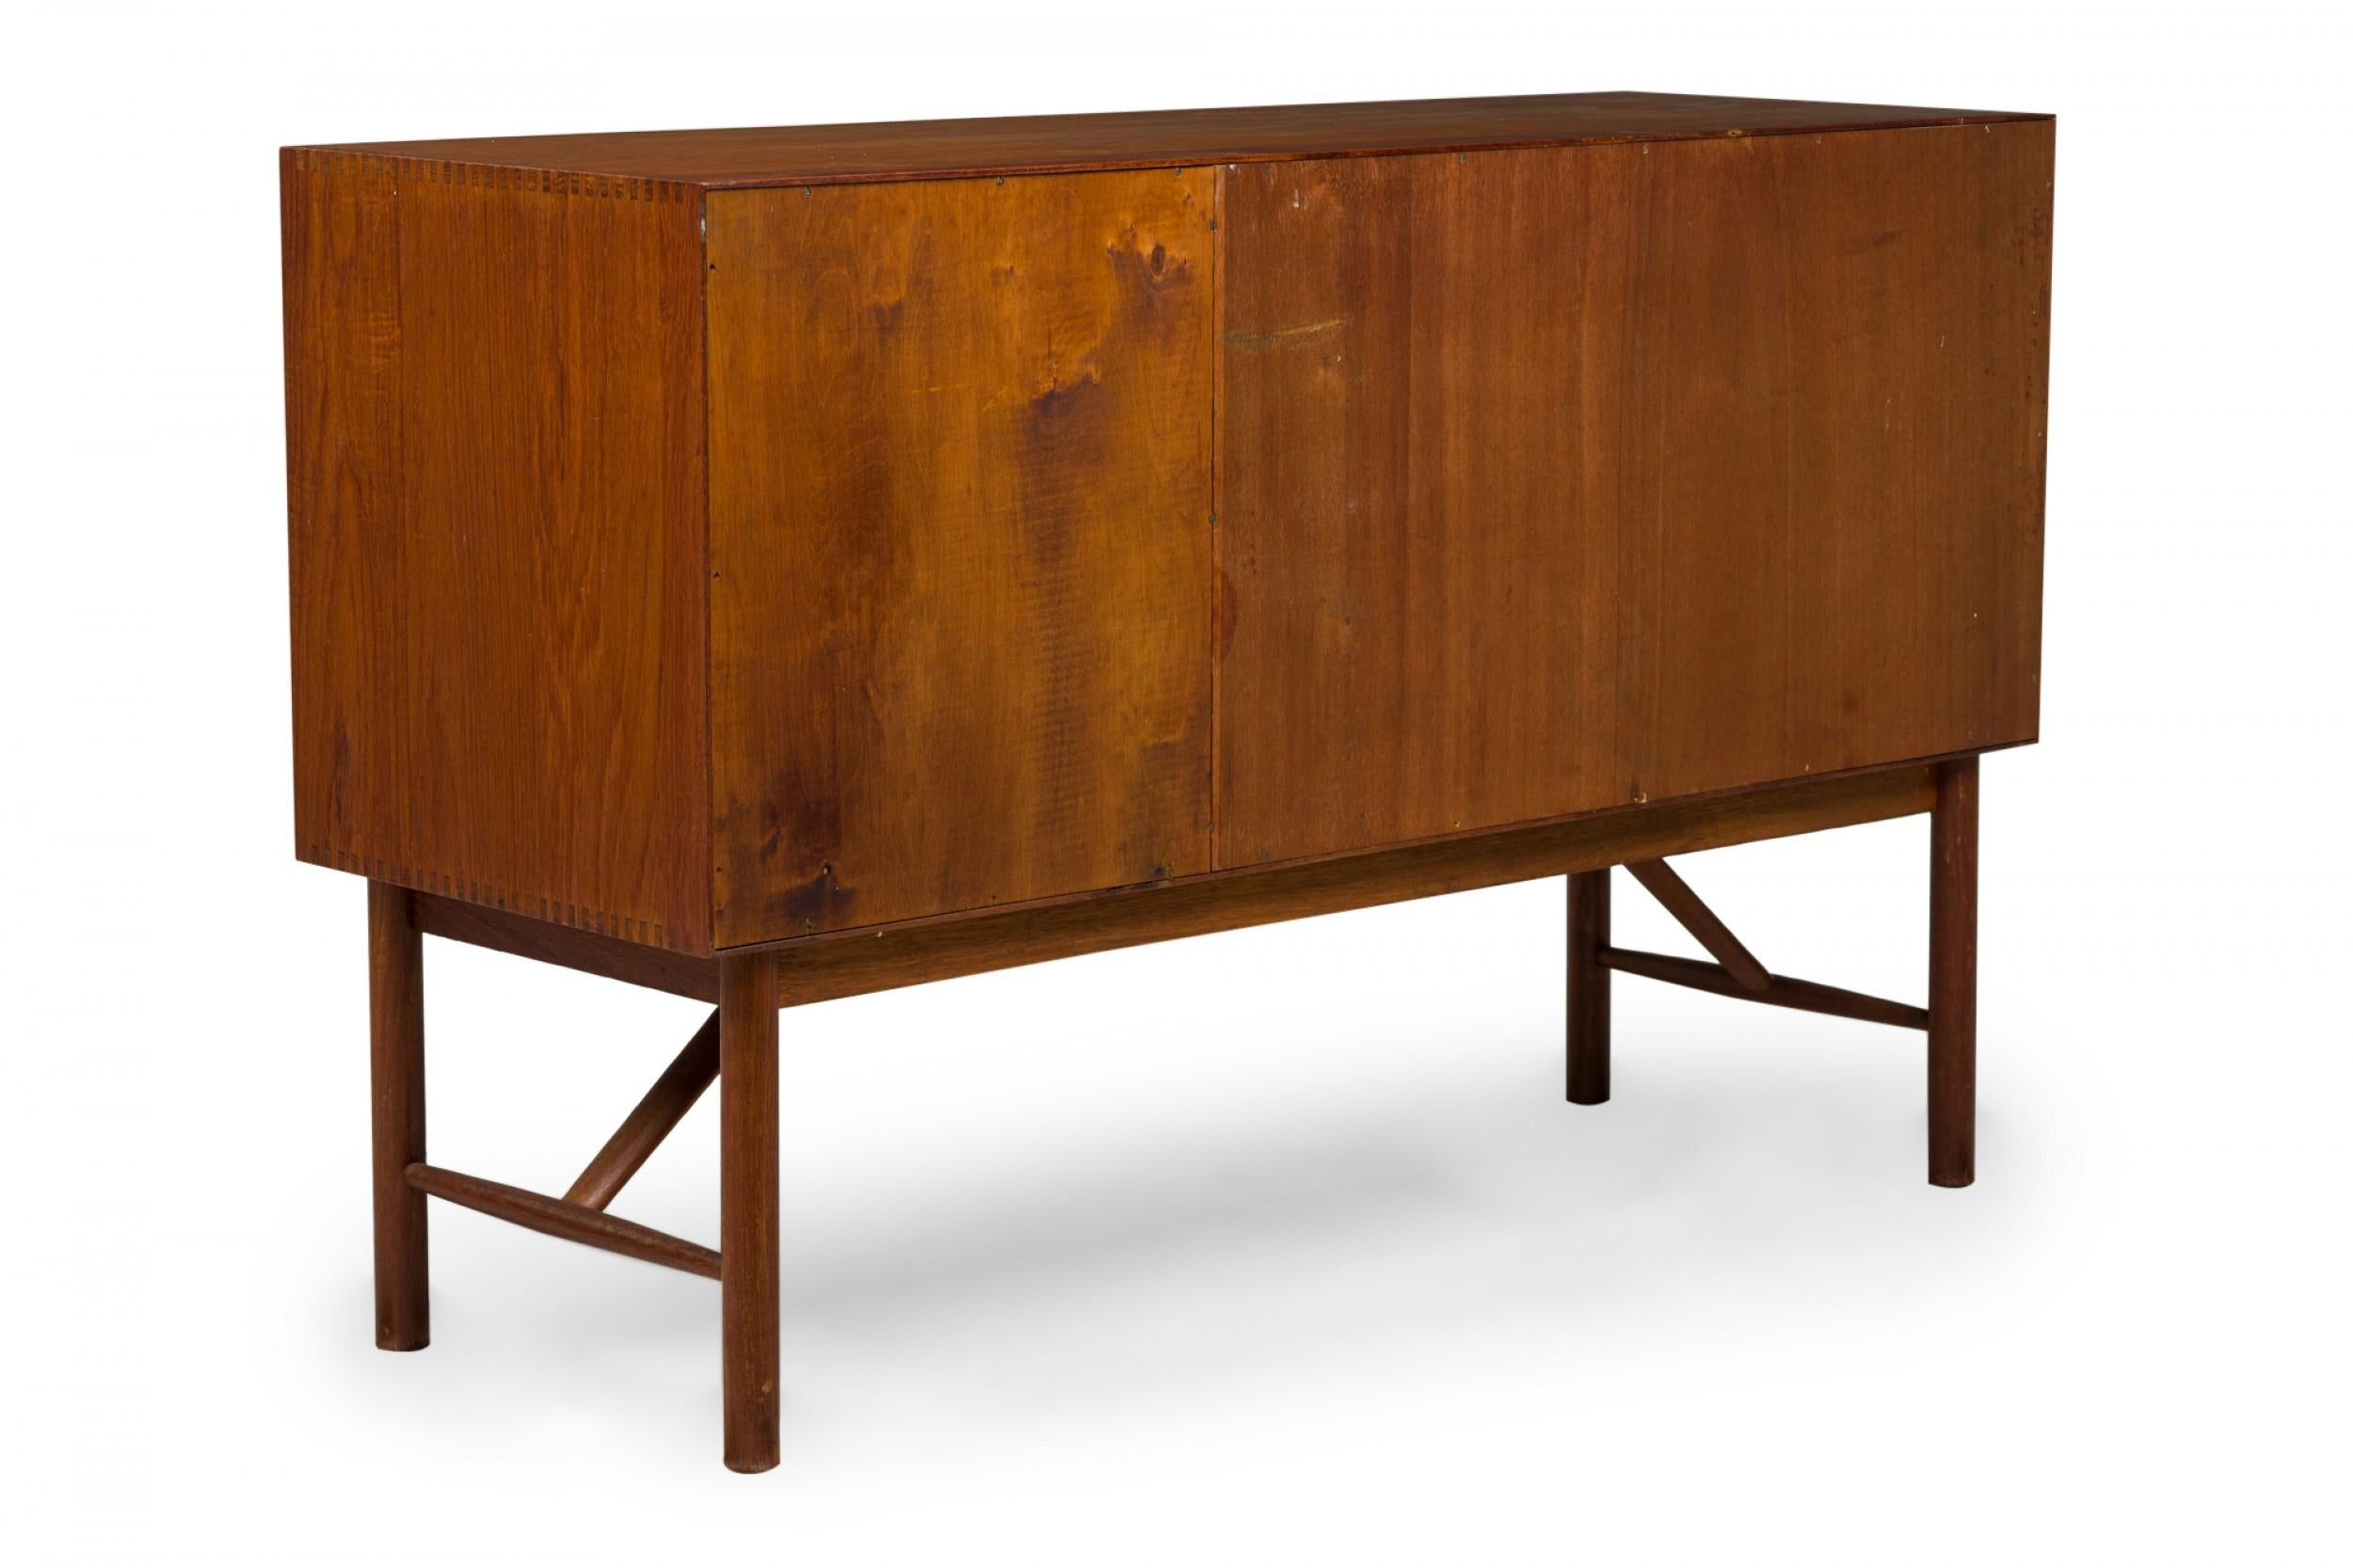 Peter Hvidt for Søborg Møbler Danish Midcentury Teak Cabinet with Small Tambour In Good Condition For Sale In New York, NY